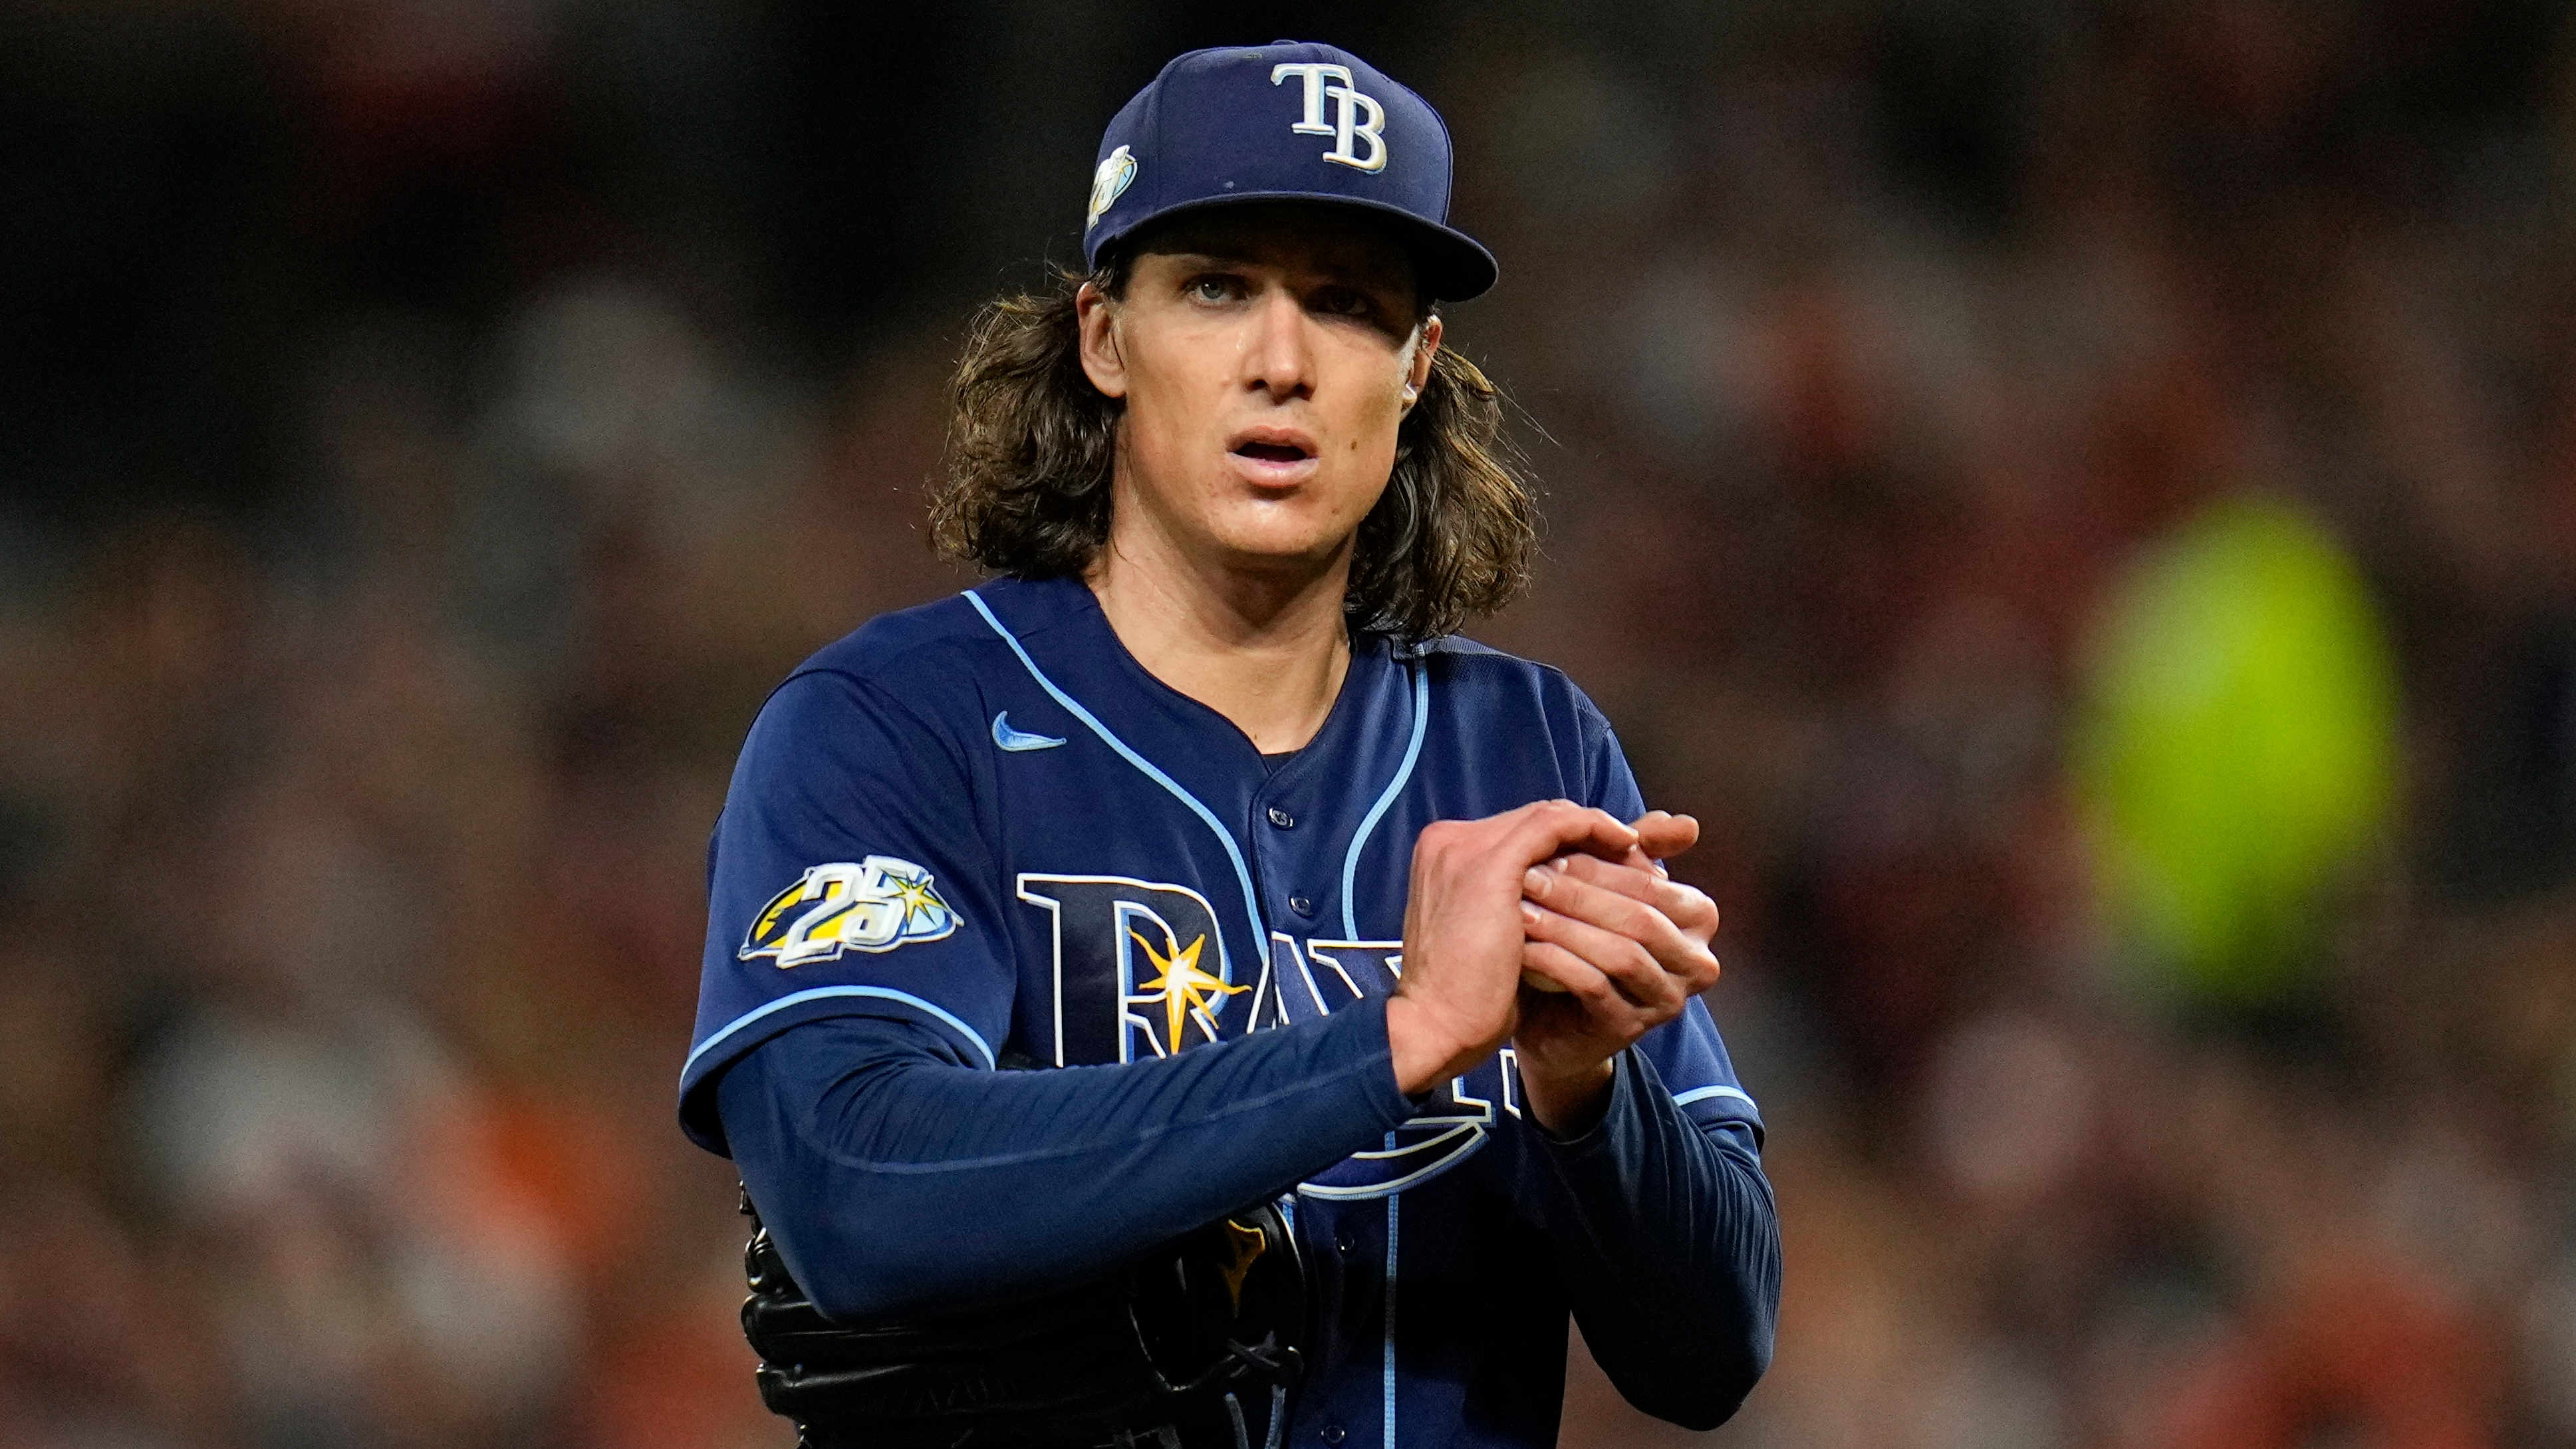 With Taylor Walls on baby duty, Rays summon Tristan Gray